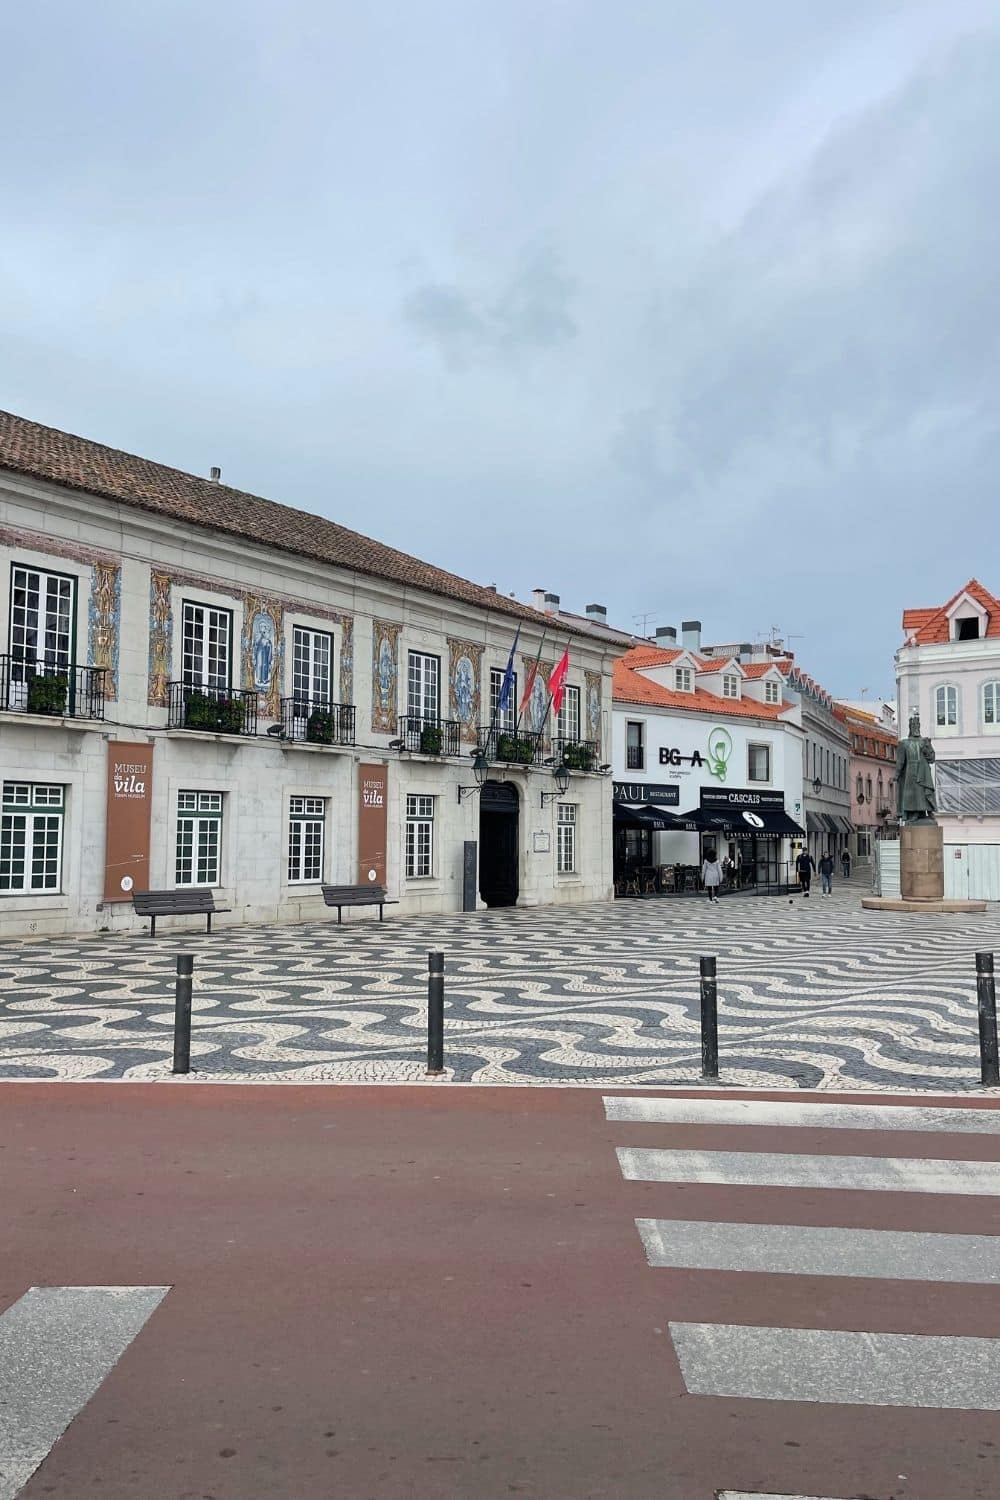 View of a historic square in Cascais with traditional Portuguese pavement design and a row of buildings adorned with azulejo tiles, under a cloudy sky, evoking the charming European coastal town atmosphere.